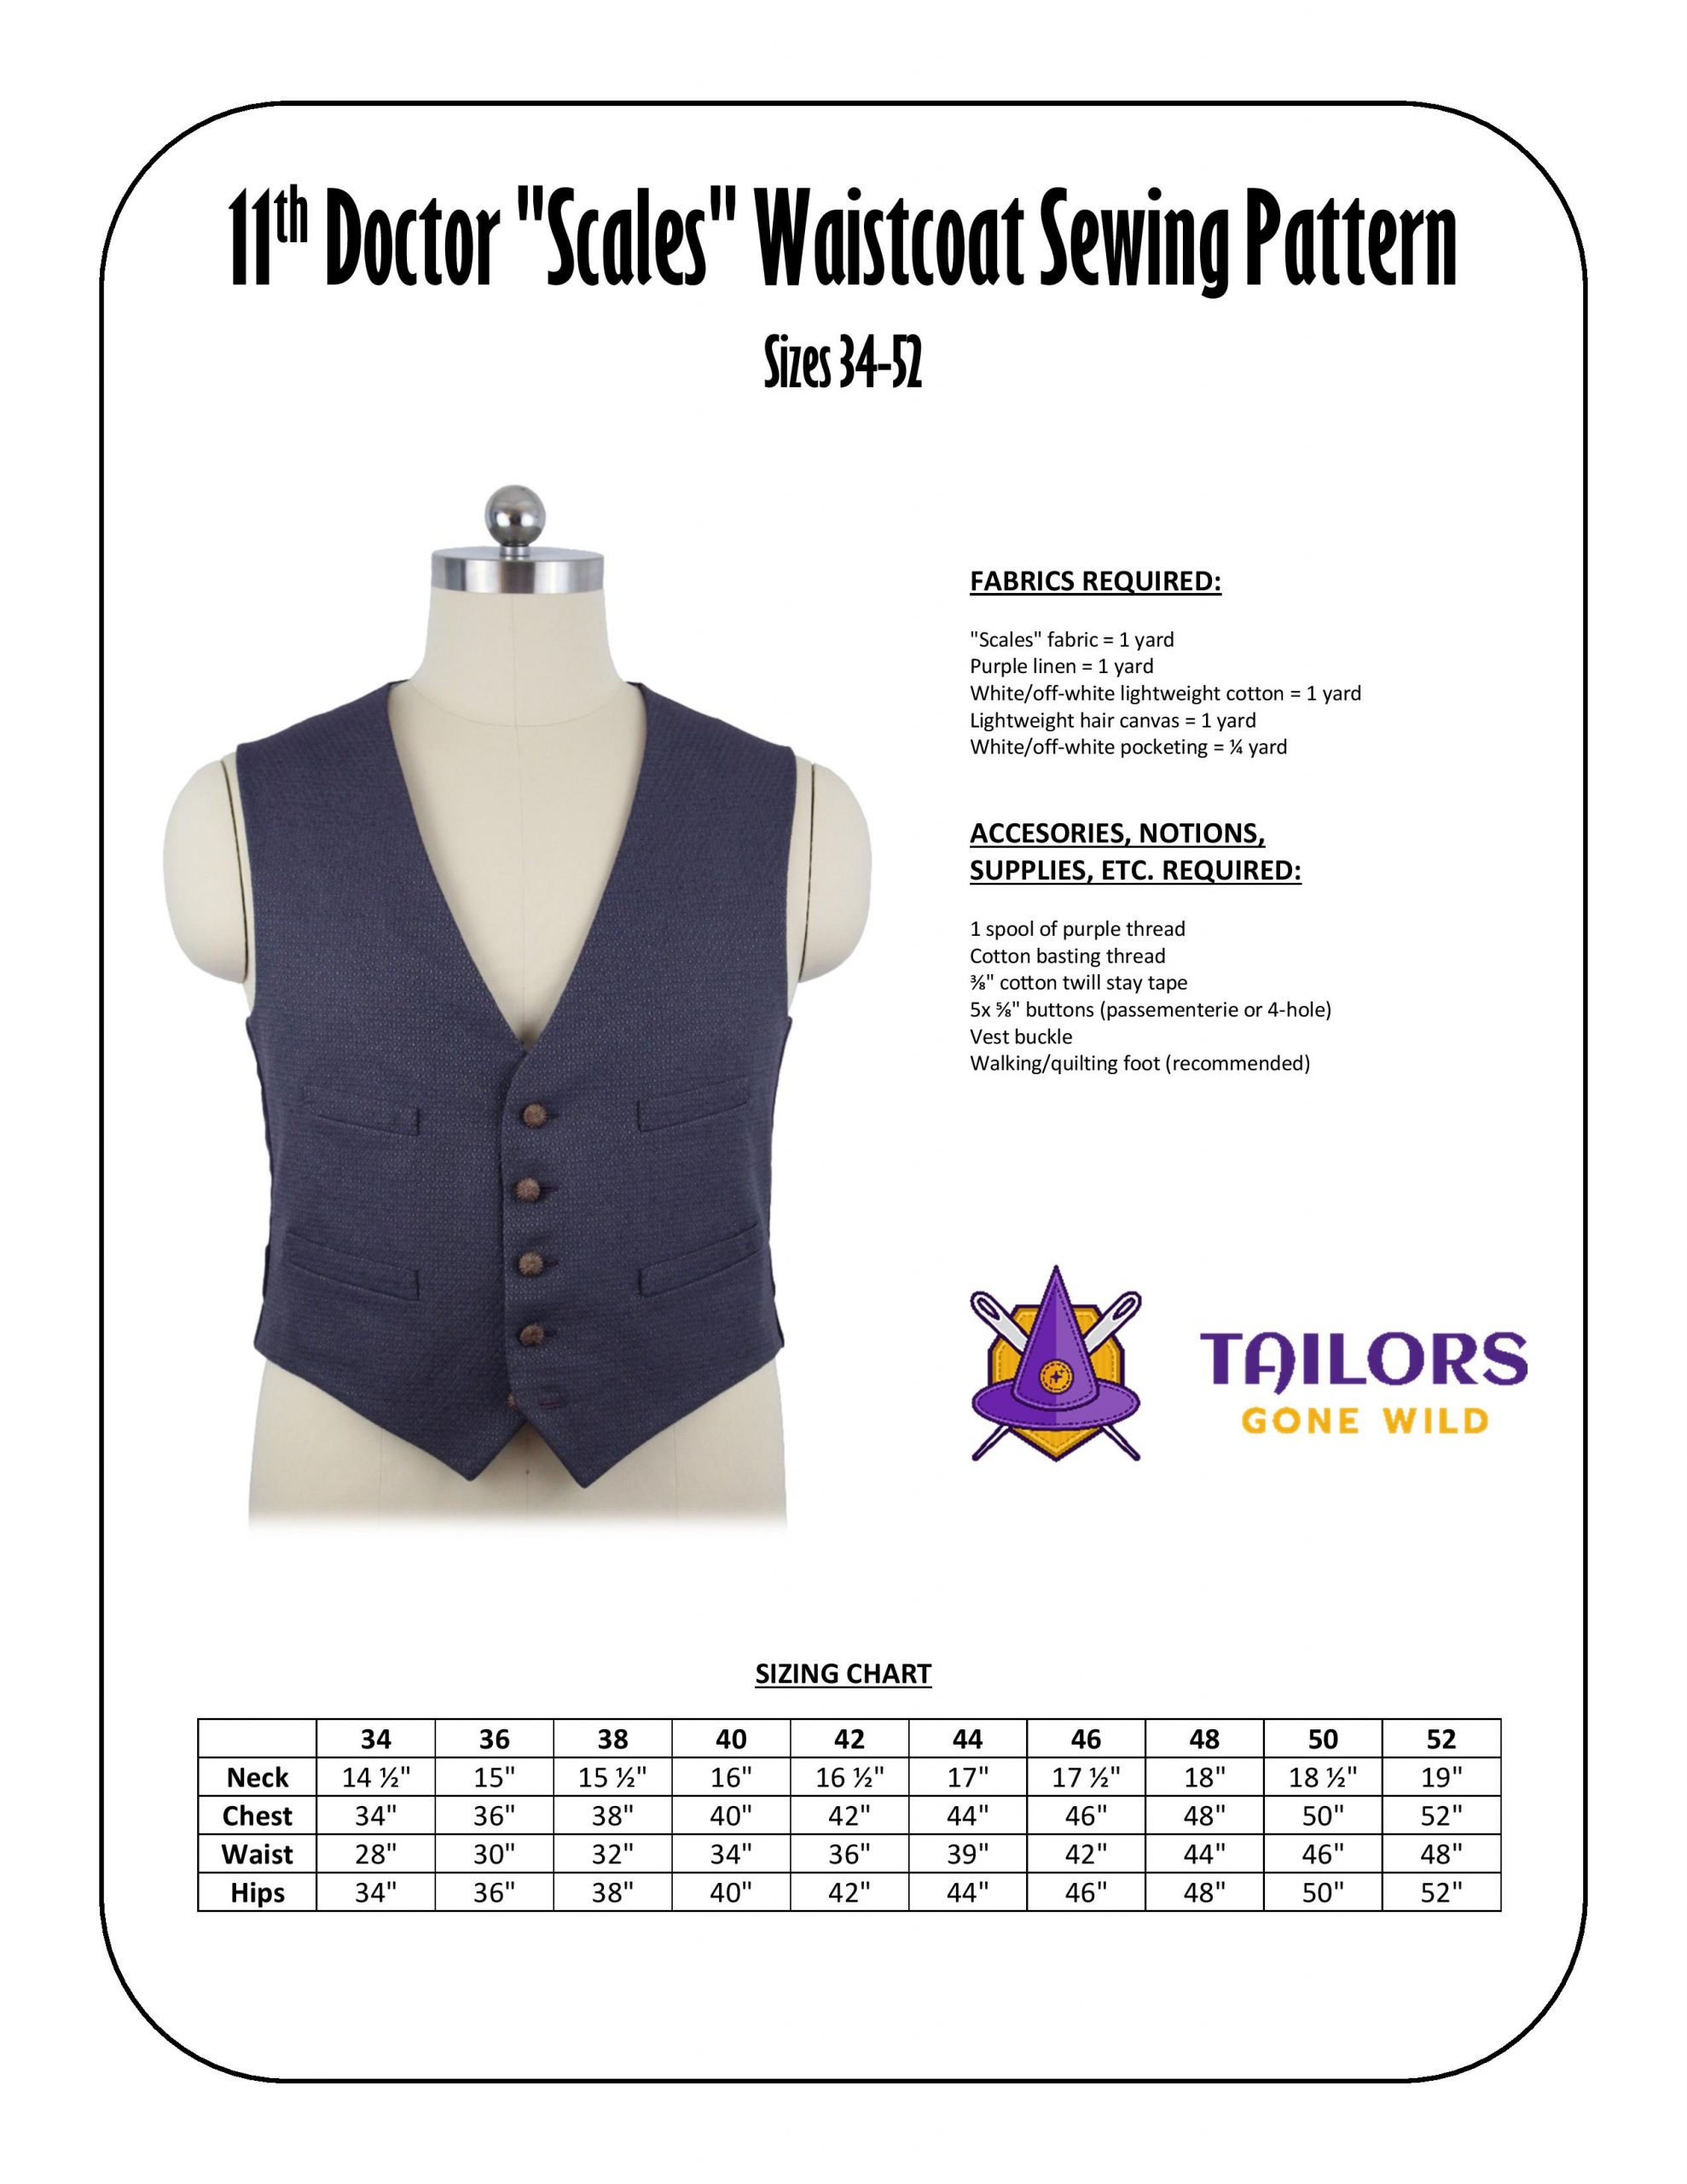 11th Doctor "scales" waistcoat sewing pattern - Tailors Gone Wild